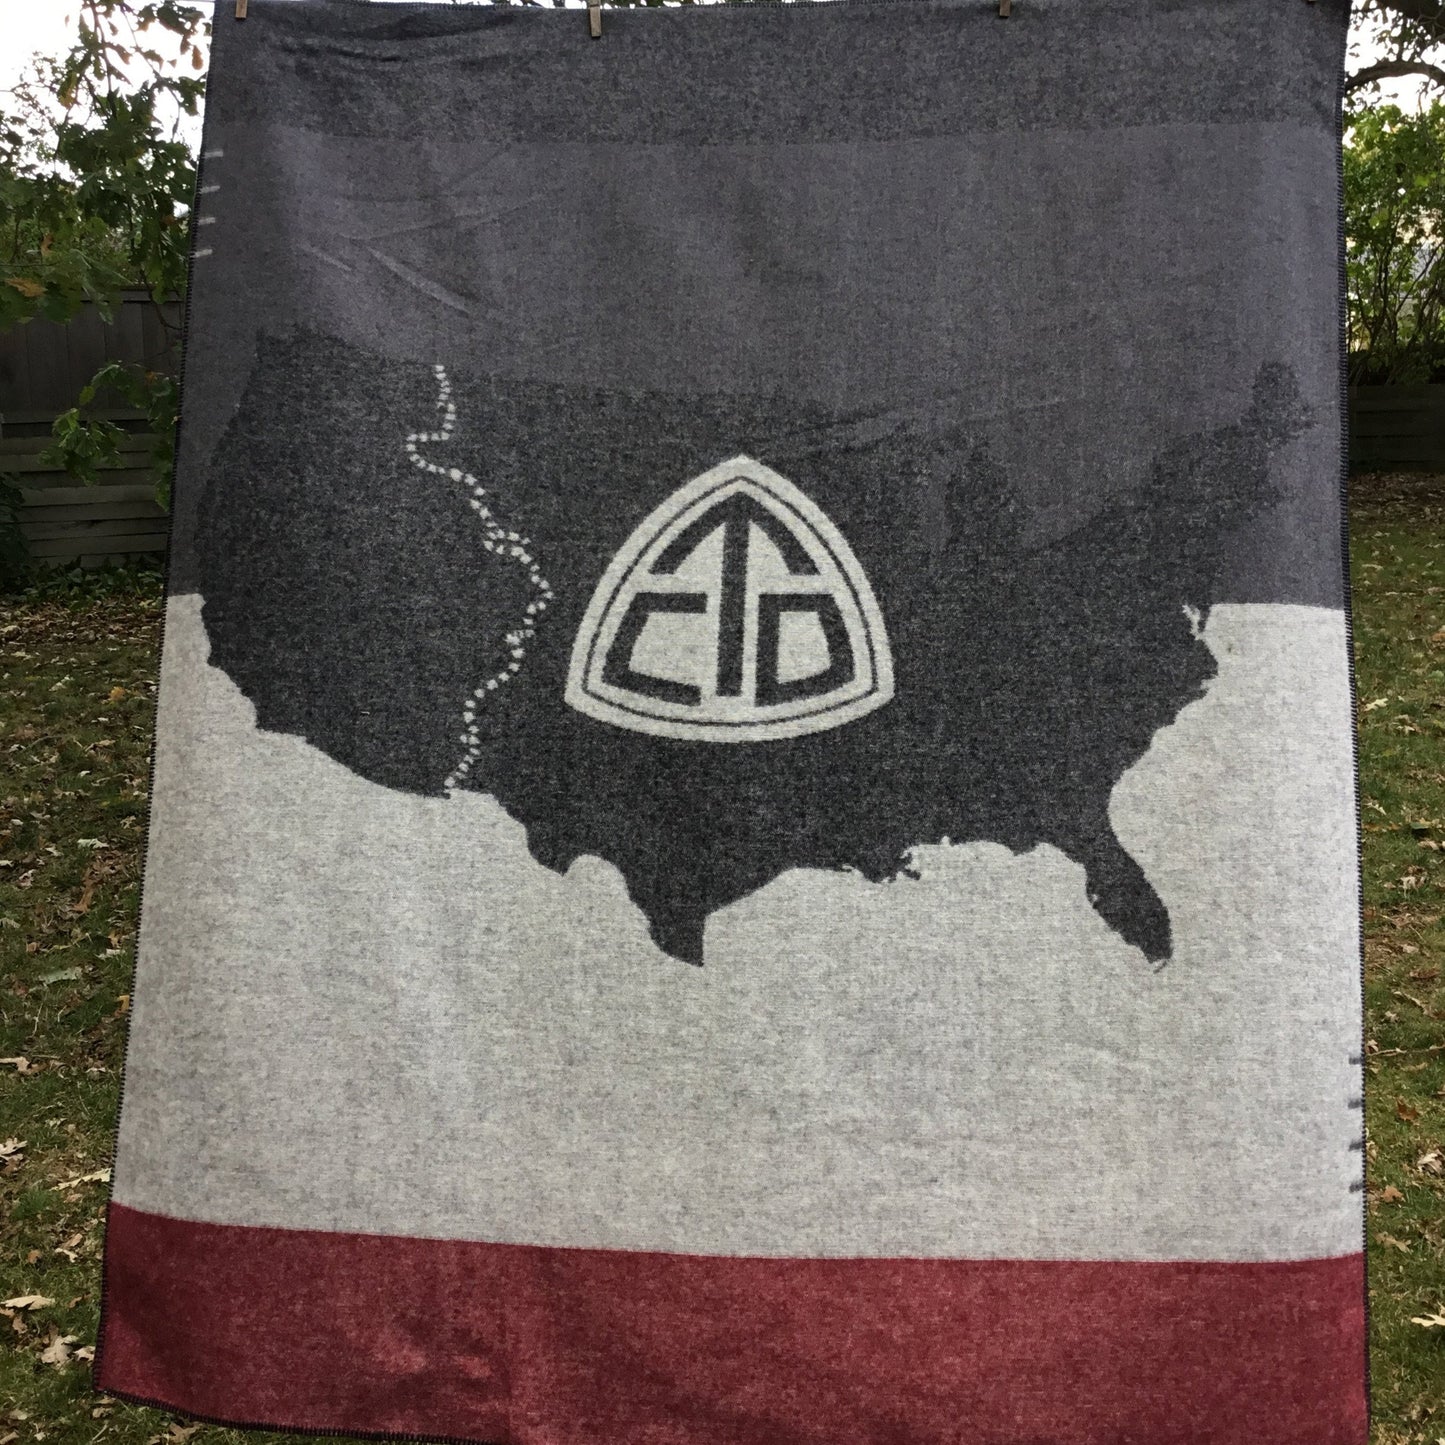 Continental Divide Trail Blanket 59" x 50"